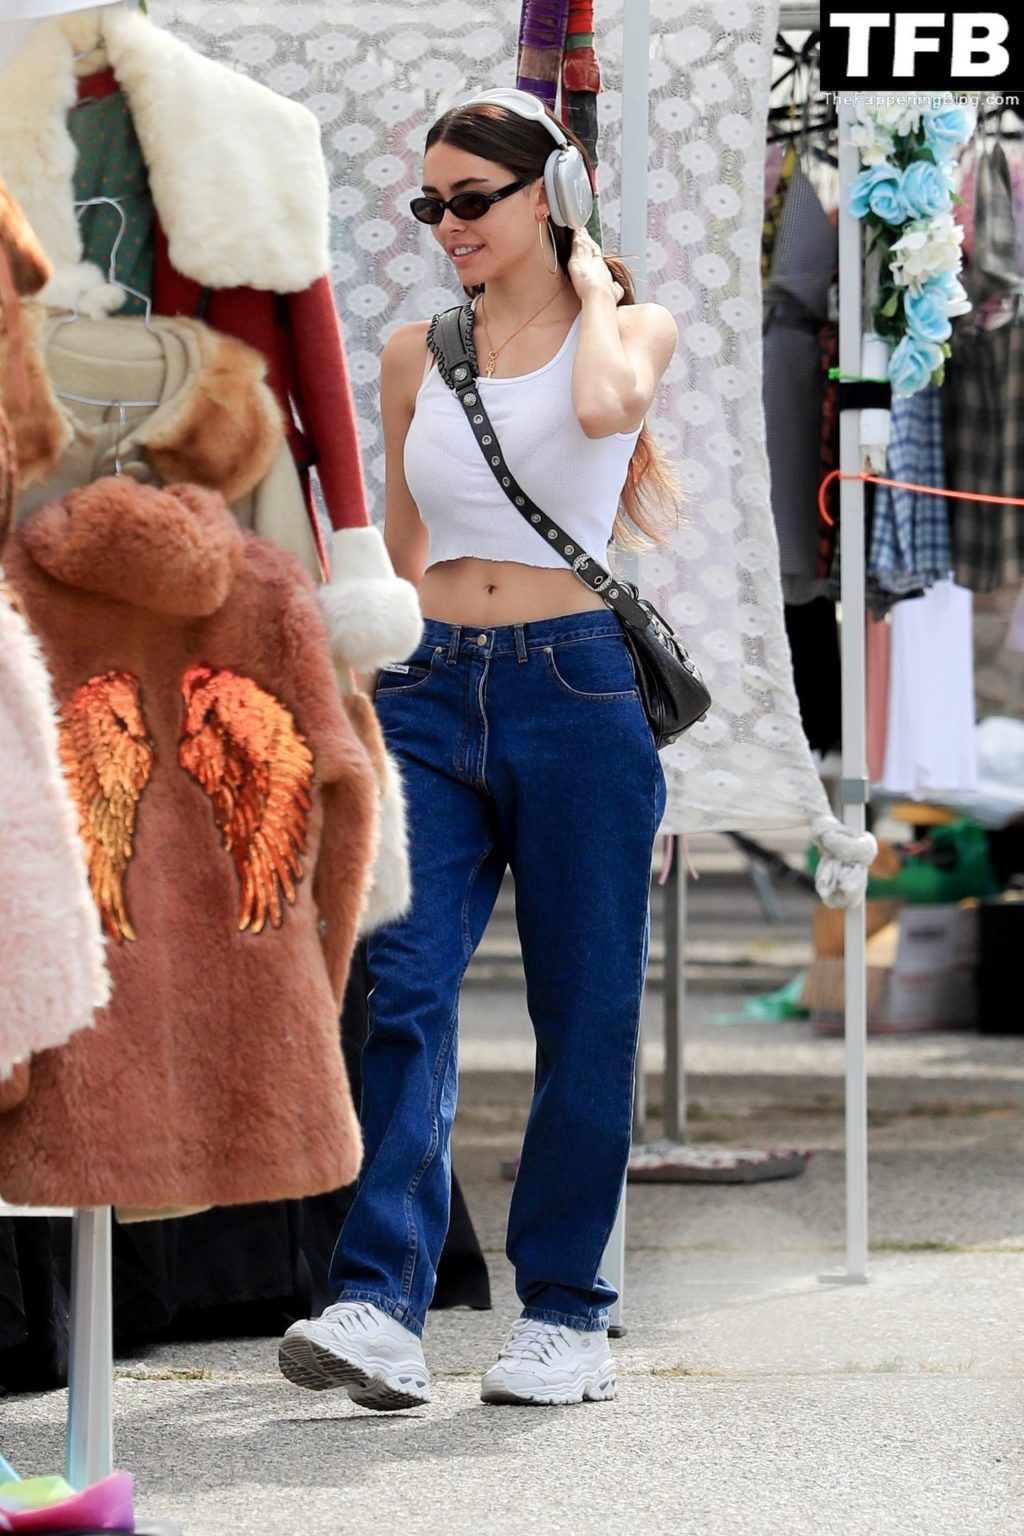 Madison Beer Sexy The Fappening Blog 26 1024x1536 - Madison Beer Wears a Tiny Crop Top Revealing a Toned Waist While Shopping in LA (39 Photos)